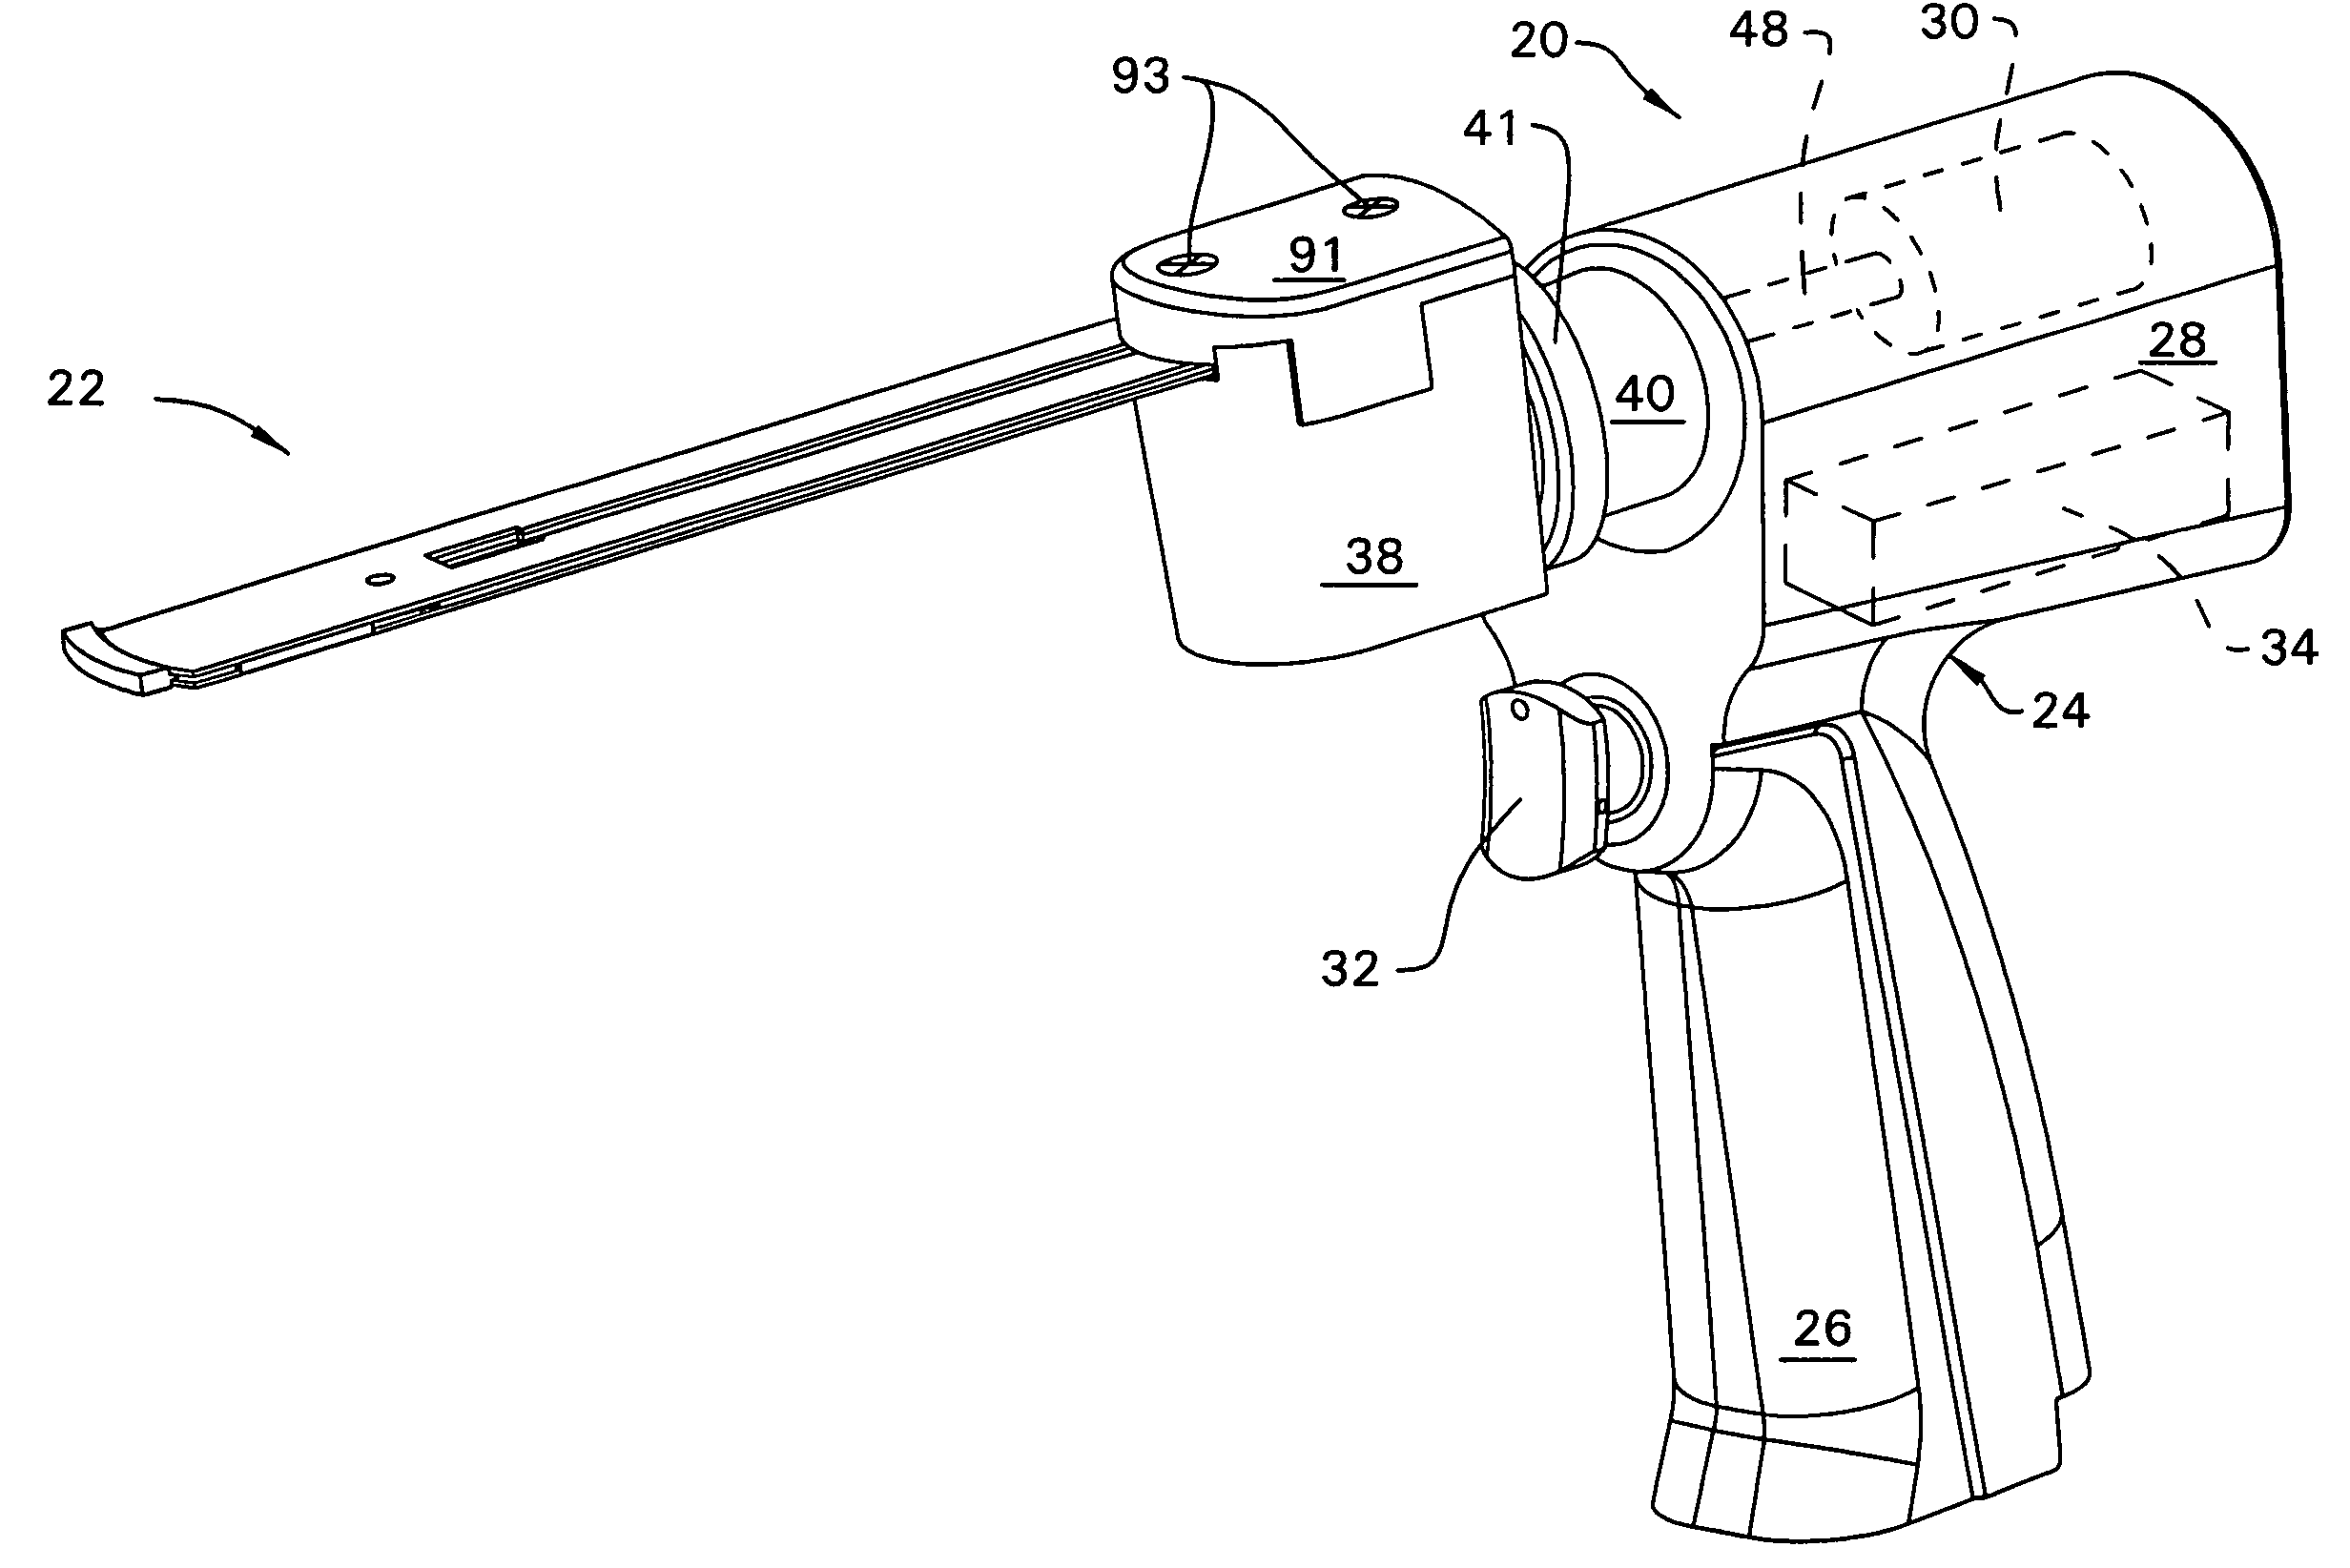 Surgical sagittal saw including a handpiece and a removable blade assembly, the blade assembly including a guide bar, a blade head capable of oscillatory movement and a drive rod for actuating the blade head